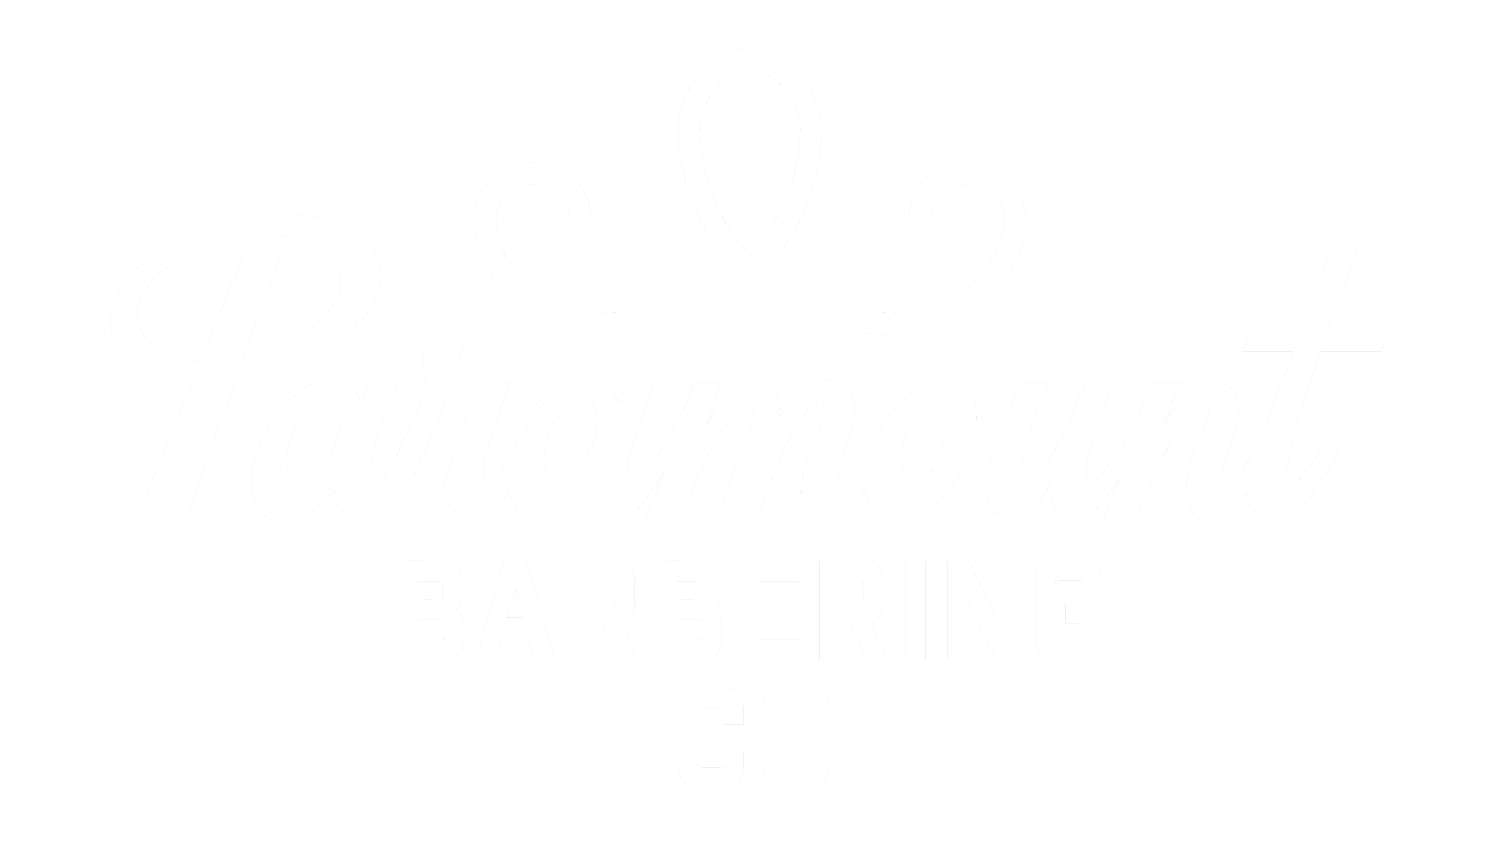 Paramount Barbering Co